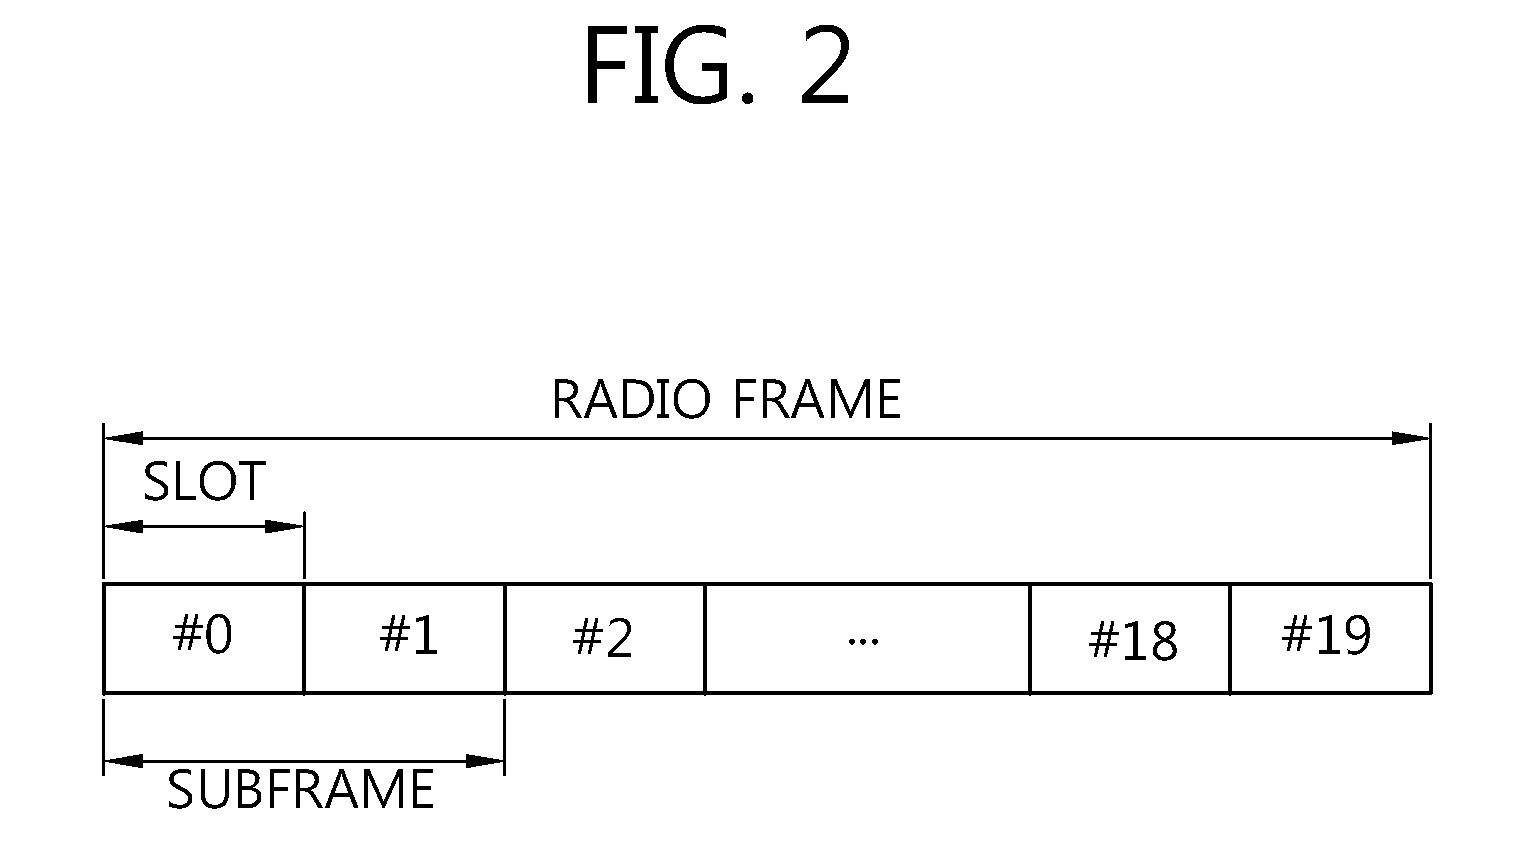 Uplink control channel transmission control method in a multi-carrier system and terminal using same